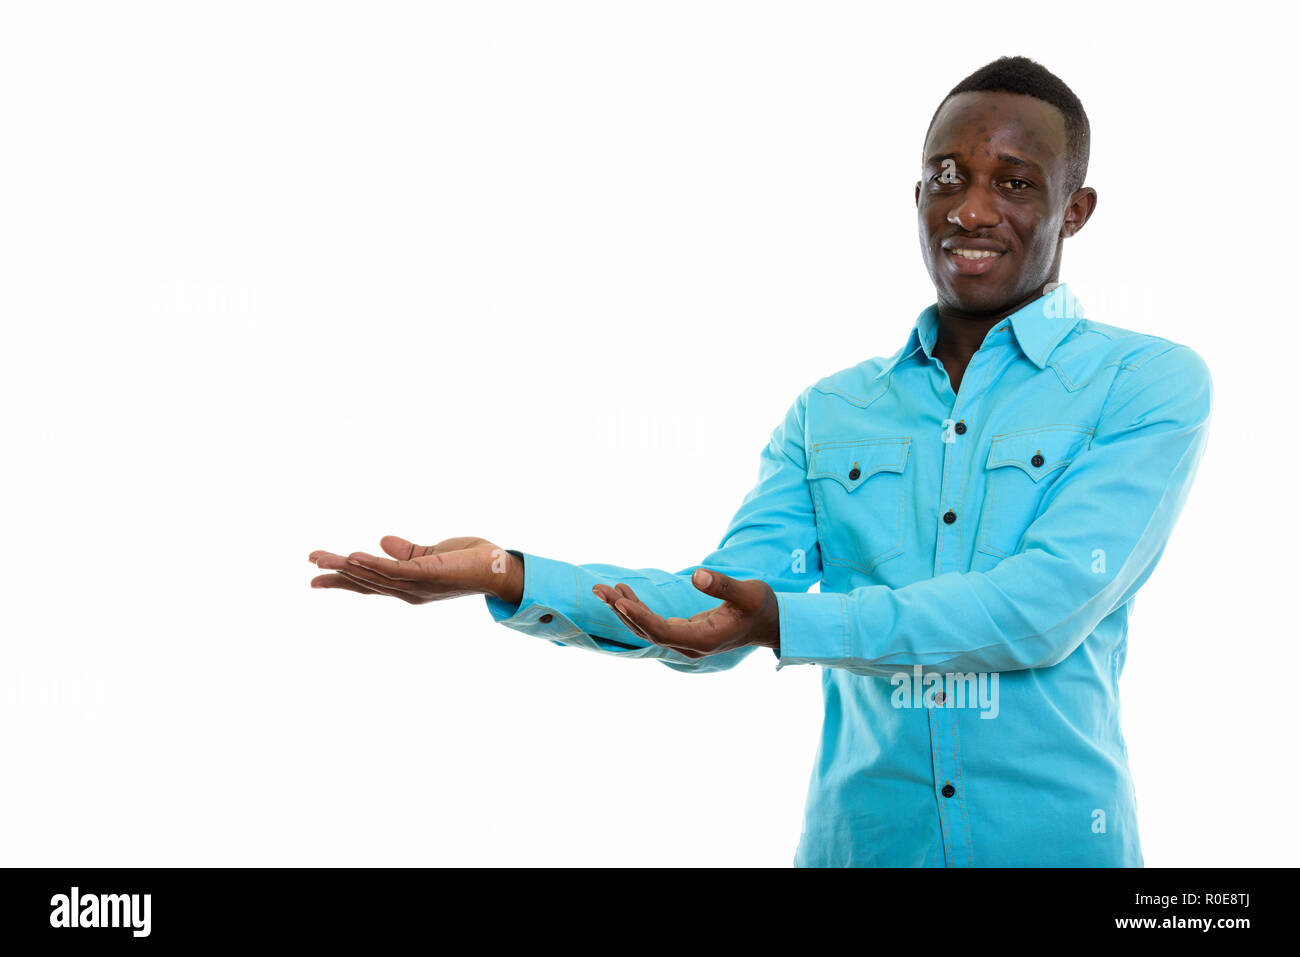 Studio shot of young happy black African man smiling while showi Stock Photo